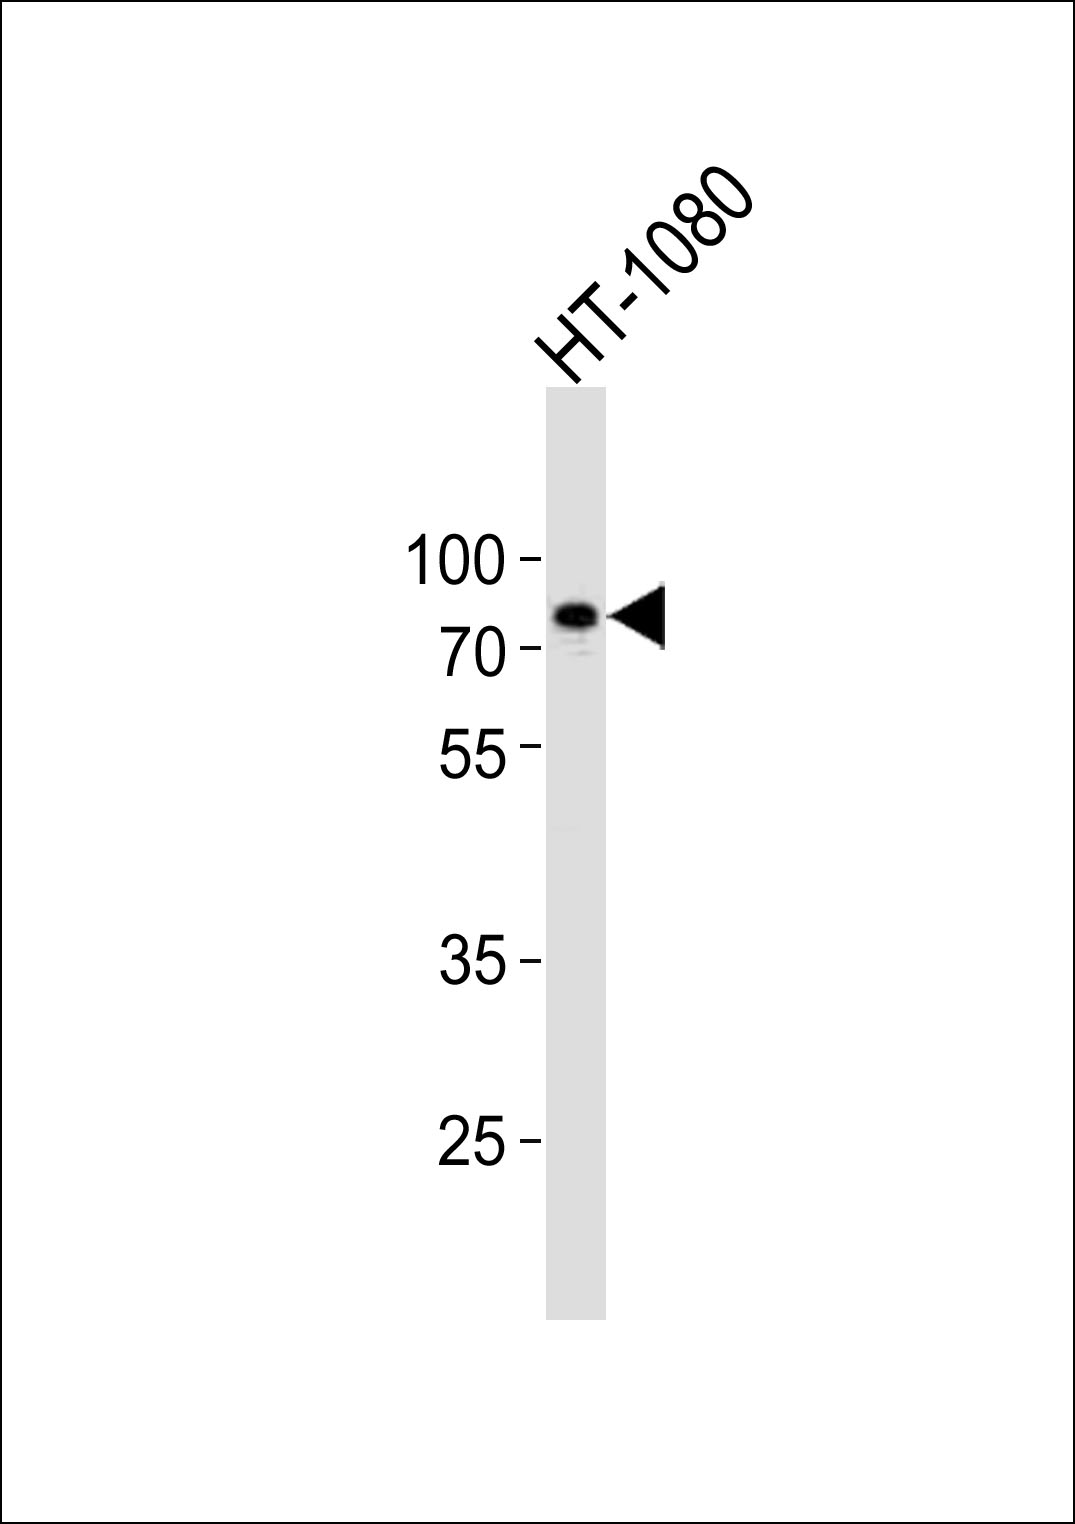 Western blot analysis of lysate from HT-1080 cell line,  using ACAP2 Antibody (Center)(Cat.  #AP21049a).  AP21049a was diluted at 1:1000.  A goat anti-rabbit IgG H&L(HRP) at 1:10000 dilution was used as the secondary antibody. Lysate at 20ug.